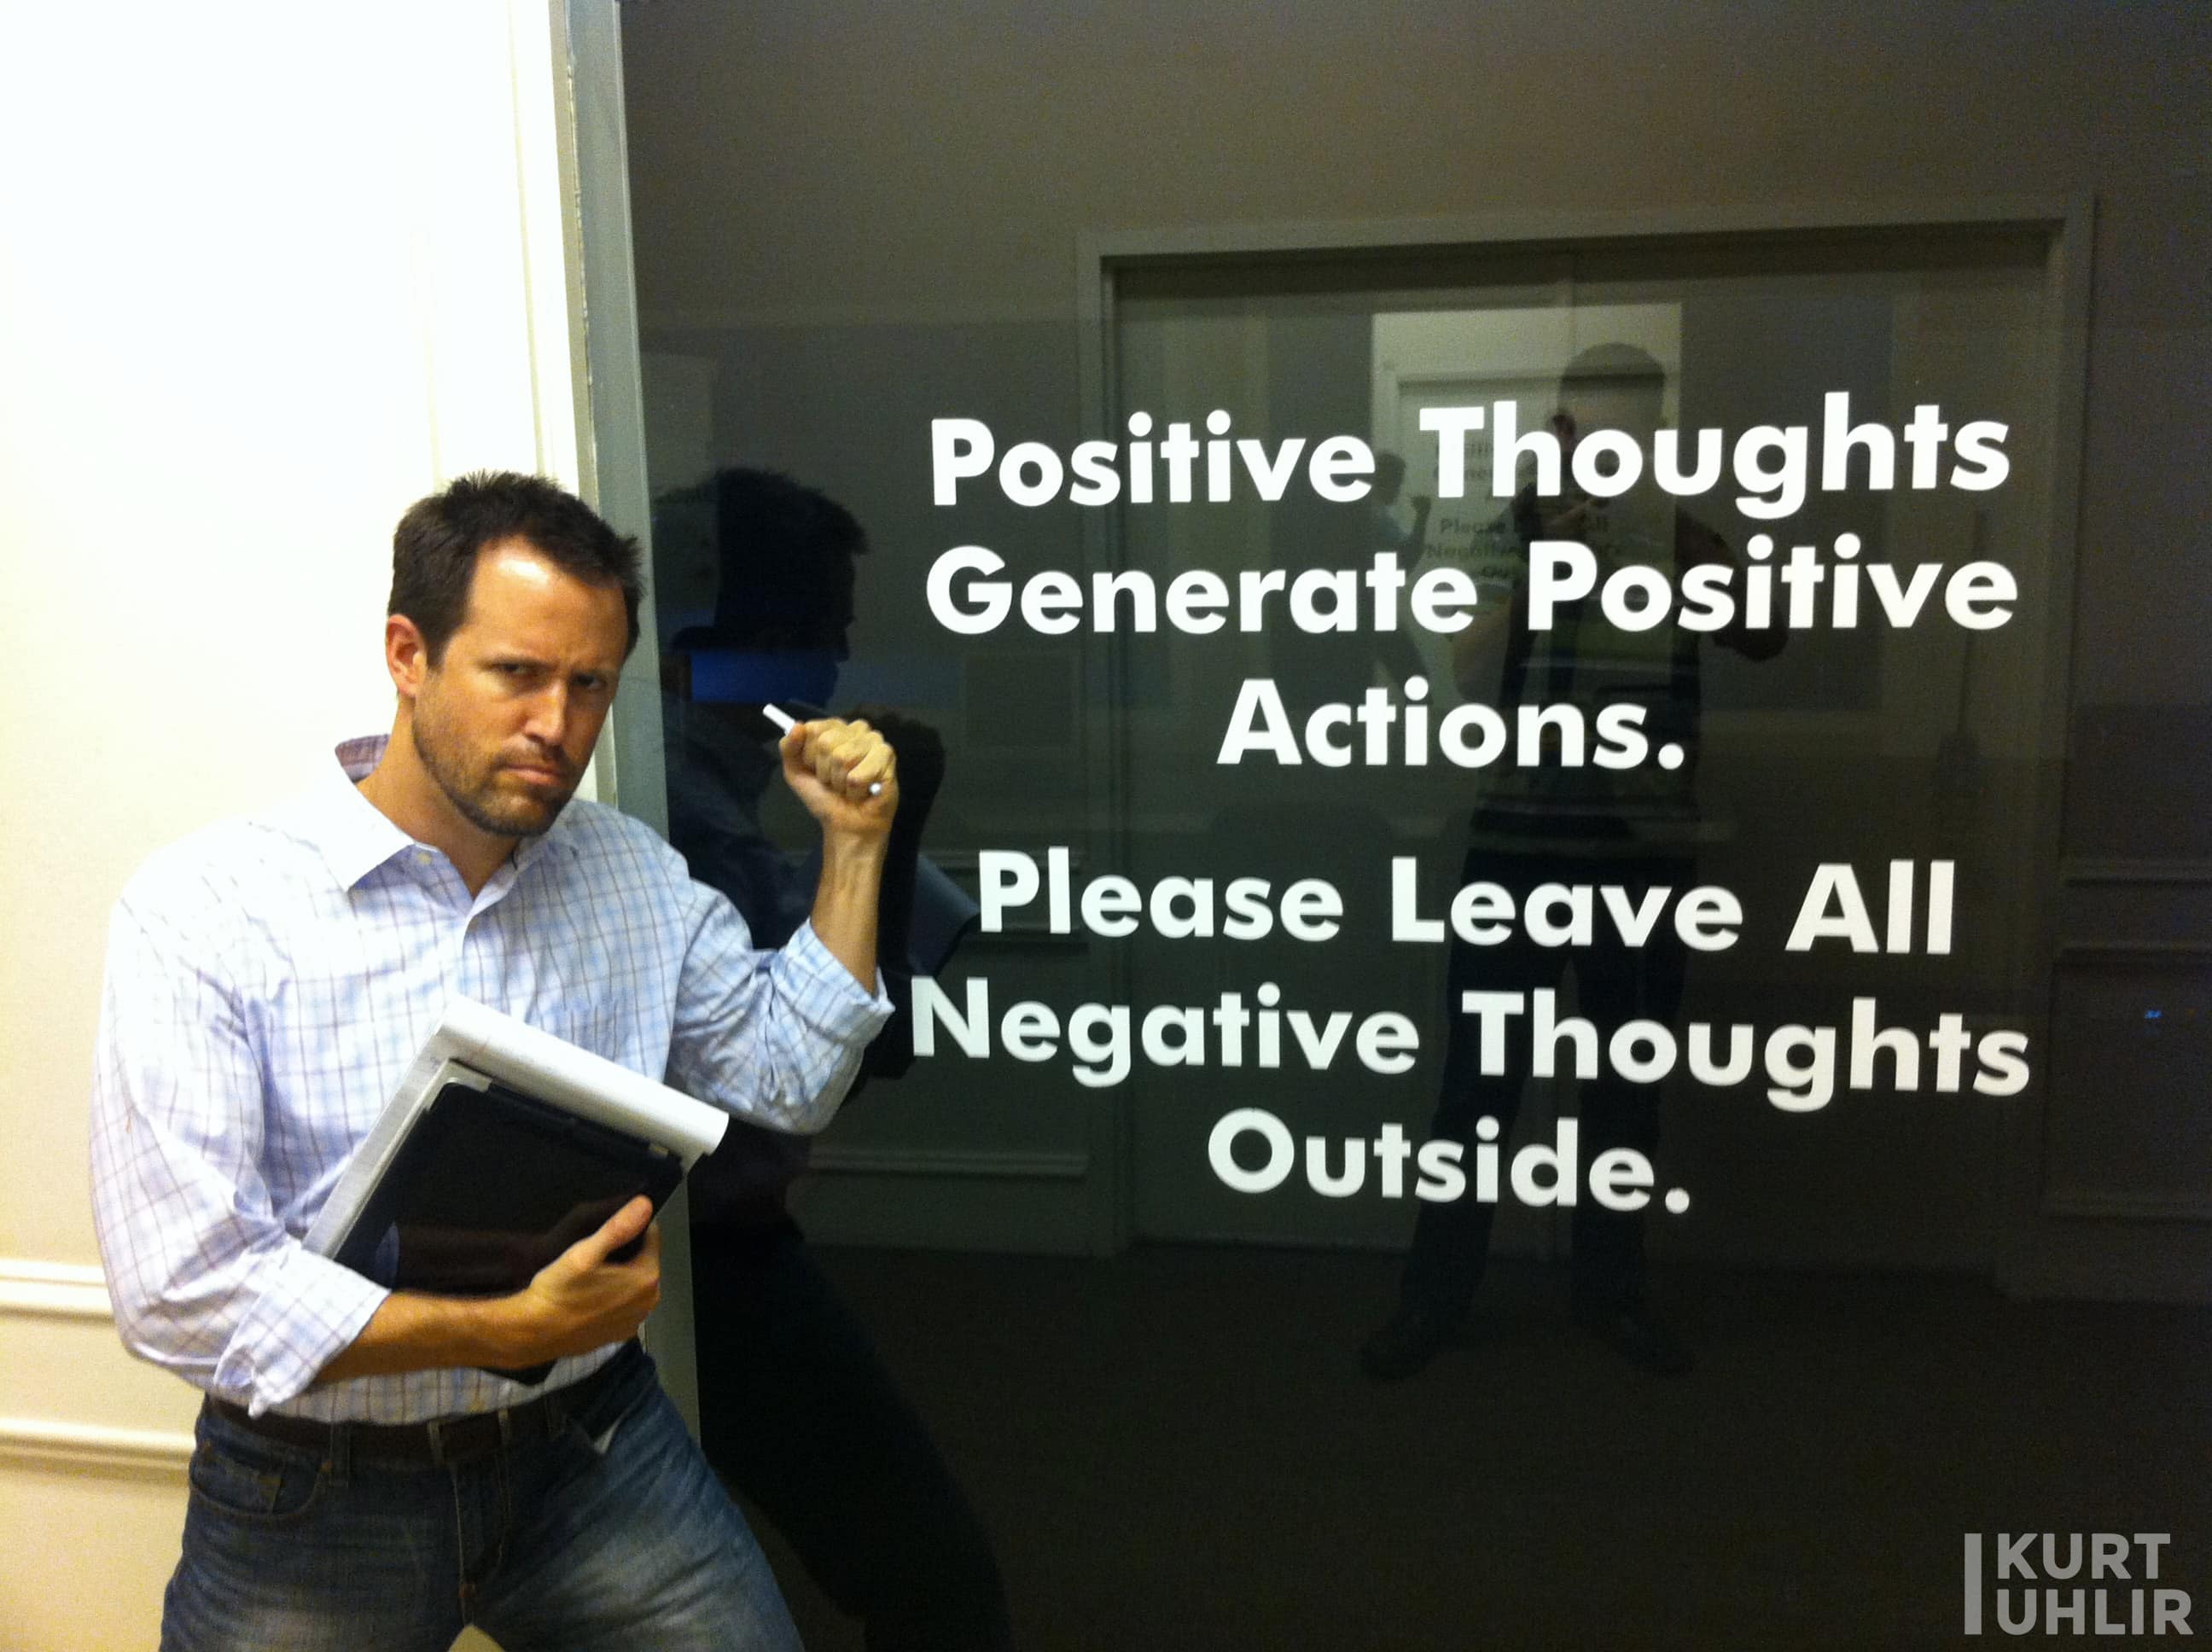 Kurt Uhlir having fun while doing customer discovery. Sign - Positive thoughts generate positive actions. Please leave all negative thoughts outside.